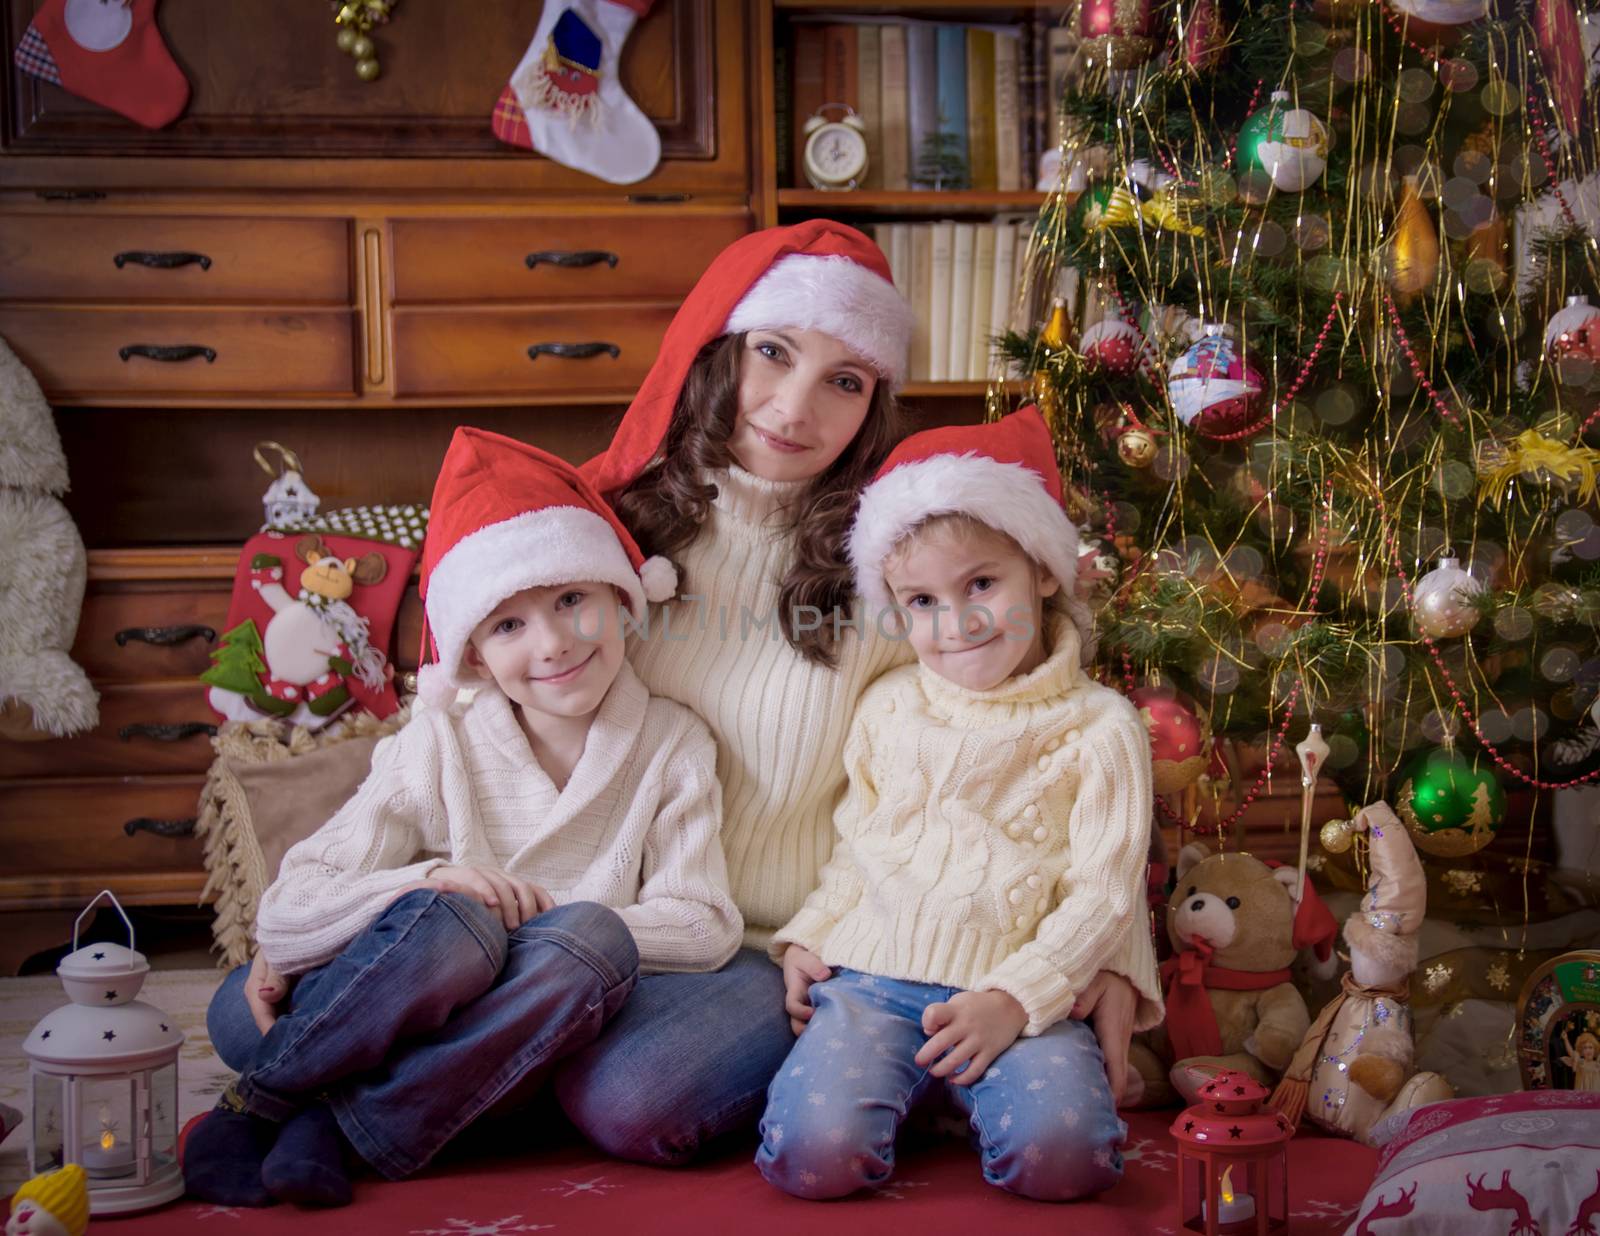 Children sitting with mother under Christmas tree in hats by Angel_a